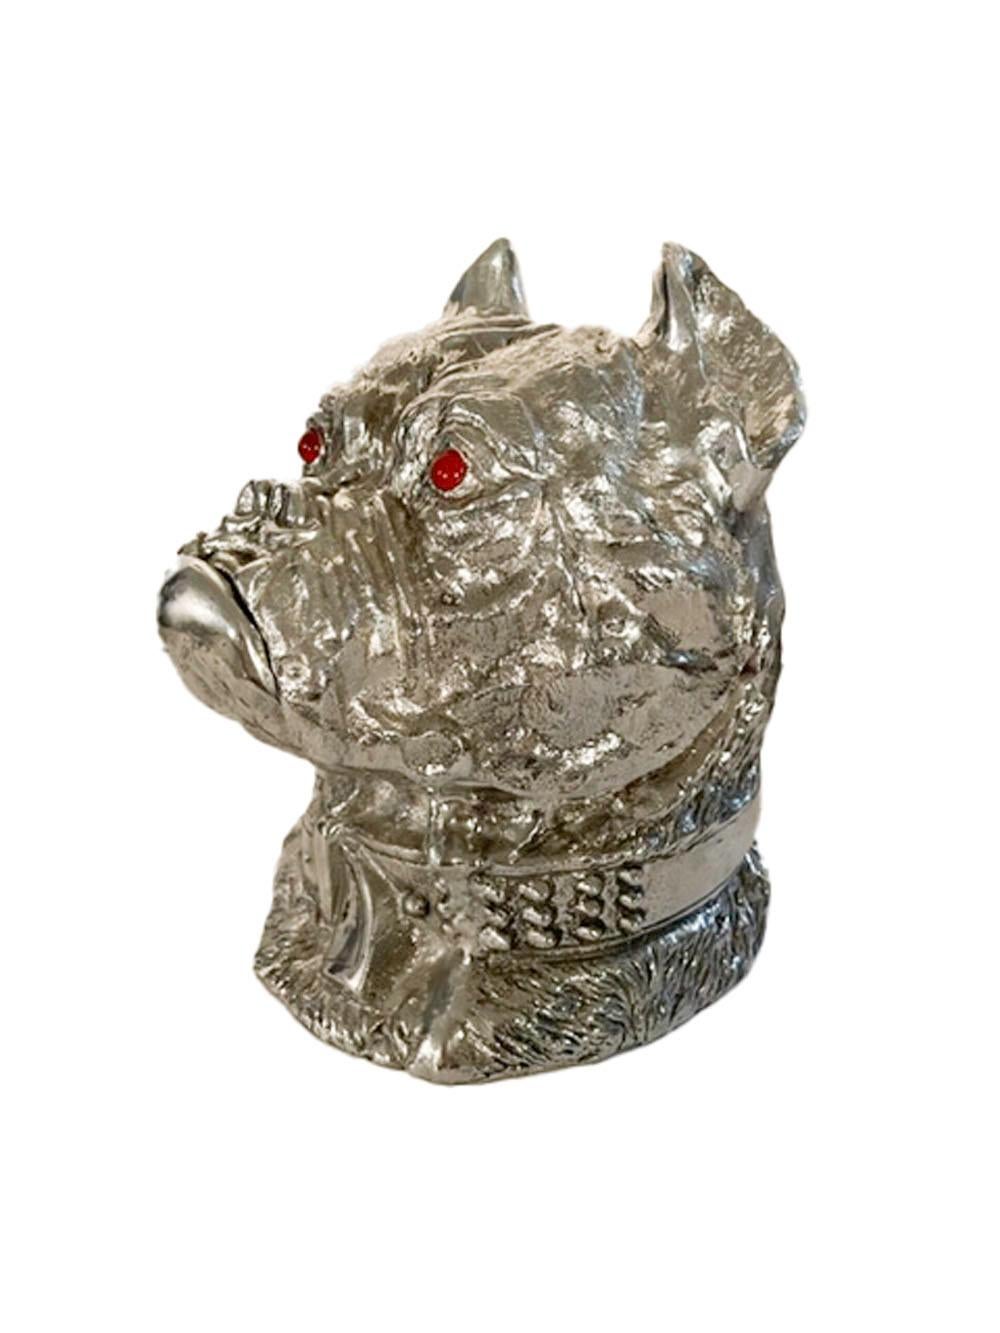 Cast aluminum ice bucket / wine cooler by Arthur Court in the form of a bulldog's head wearing a wide collar. The Lid lifts off for easy access and is finished with red glass eyes.